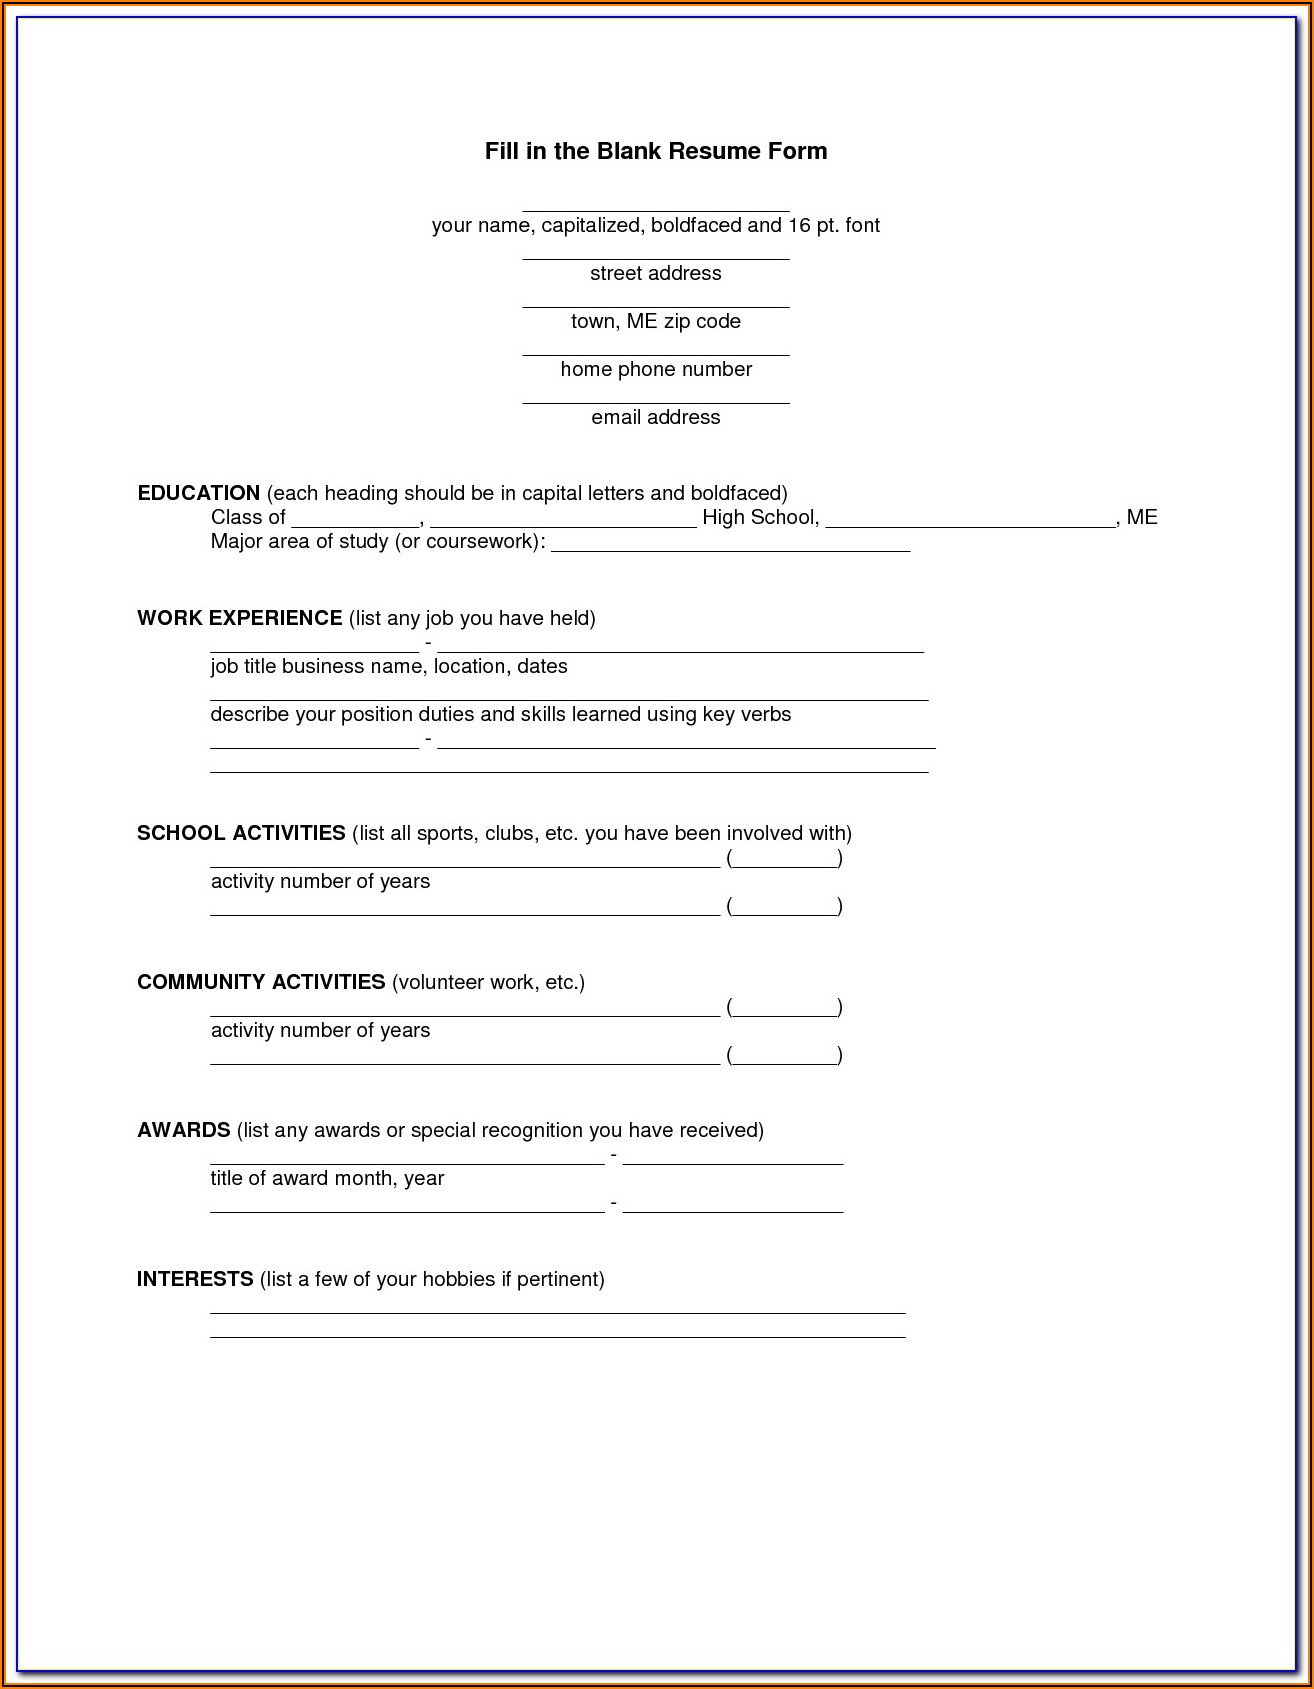 Fill In The Blank Resume Form